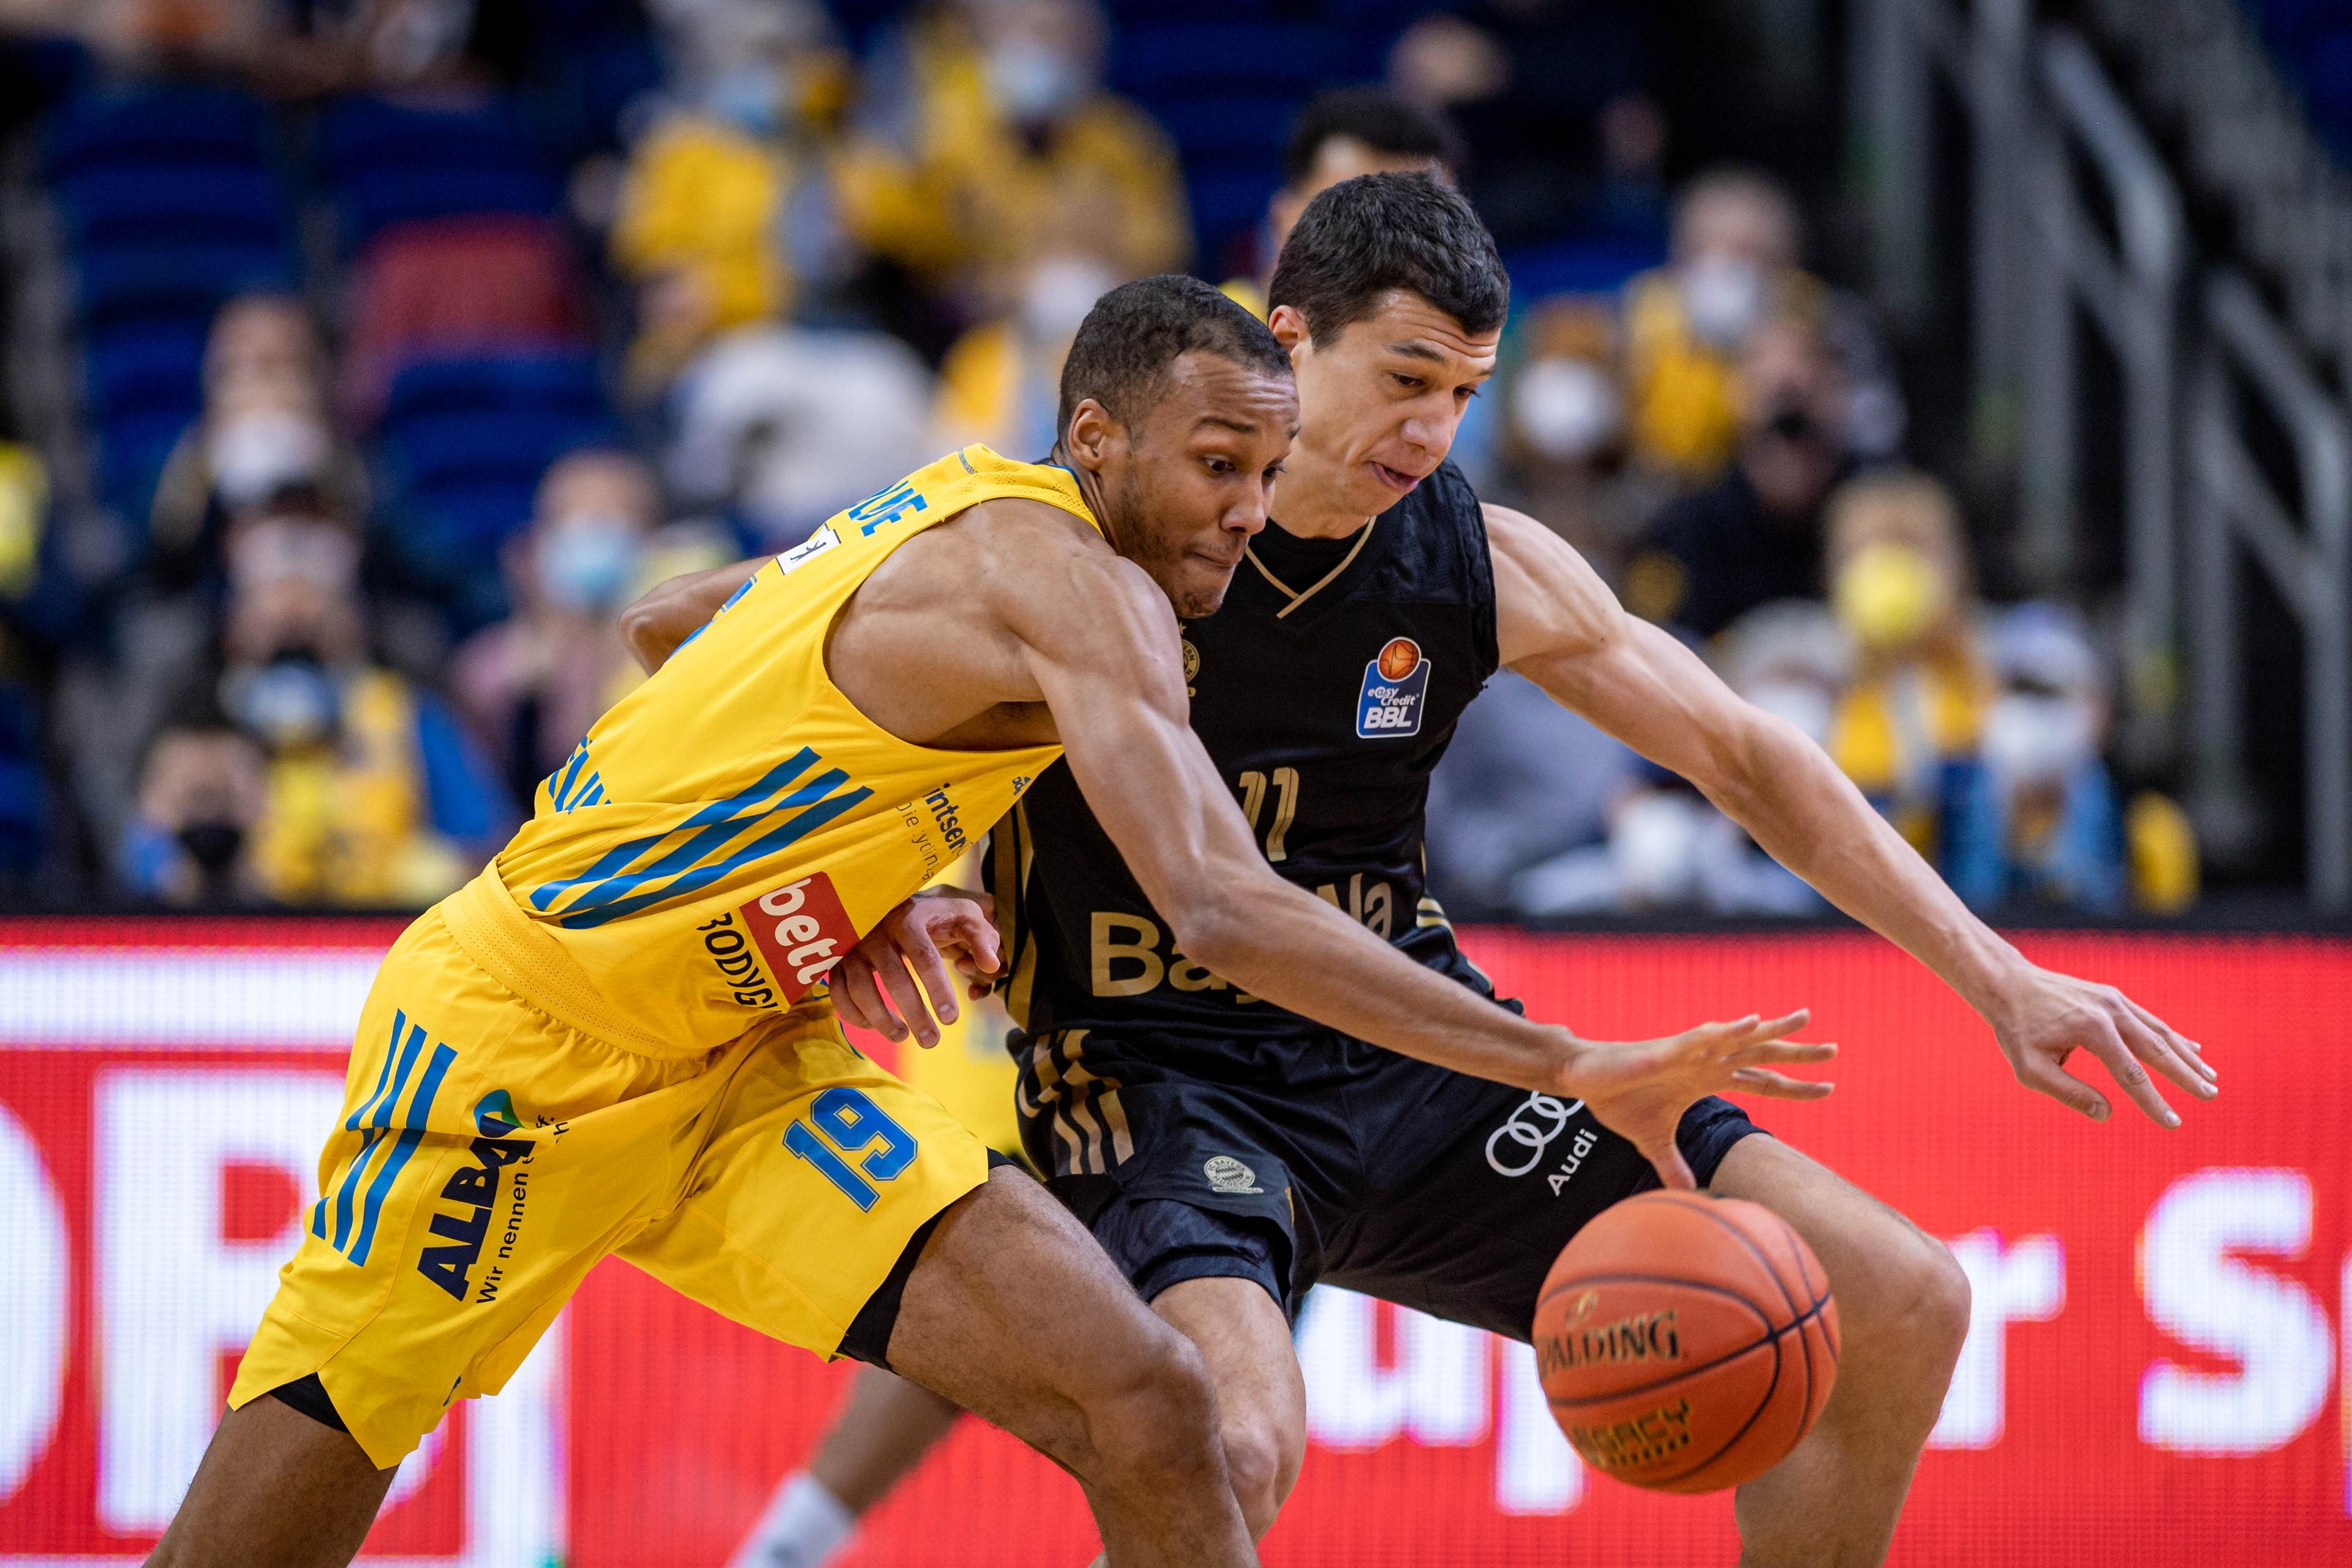 The north-south easyCredit BBL rivalry will continue as two-time reigning champions ALBA BERLIN have a date in the Finals with FC Bayern Munich - in a re-match from last season and three of the last four campaigns. Bayern needed five games to fend off Telekom Baskets Bonn while Berlin finished off a sweep of MHP RIESEN Ludwigsburg. Speaking of Ludwigsburg, the league’s longest-serving head coach John Patrick is leaving the club - most likely for Japan. Another big name coaching move saw Raoul Korner take over as the new Hamburg Towers playcaller. And one more big piece of off-court news is FRAPORT SKYLINERS being awarded a wild card for the 2022-23 season.